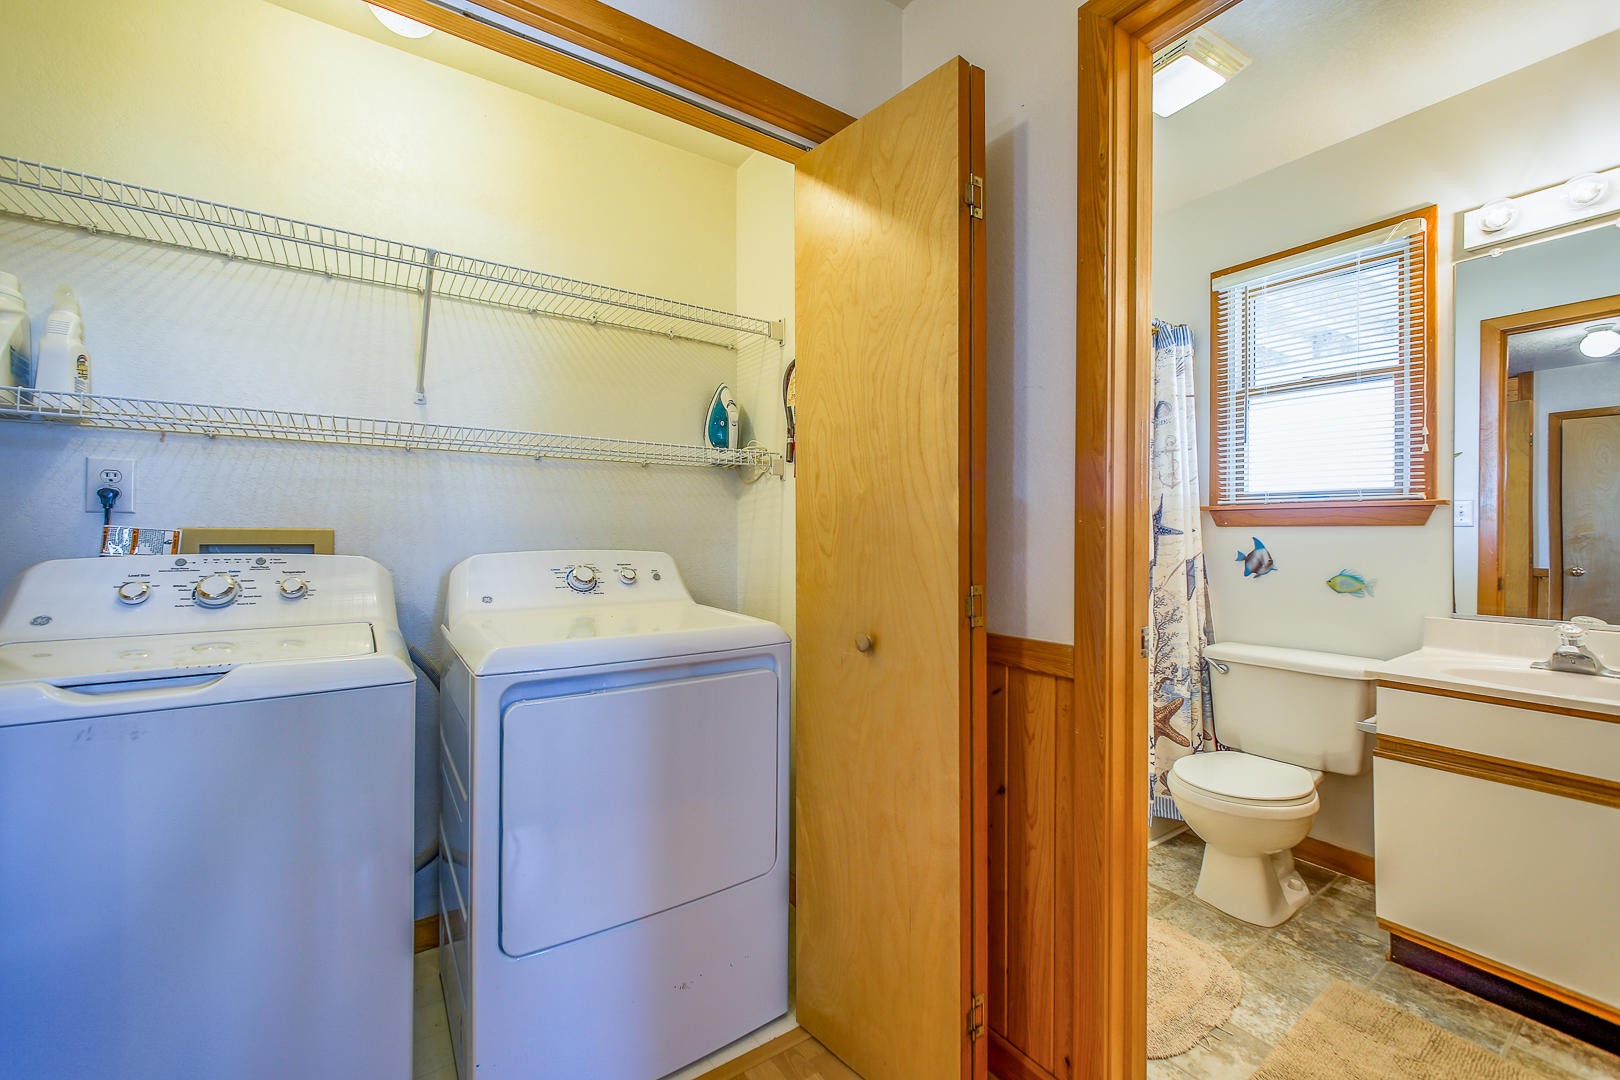 Laundry and Bathroom on mid-level